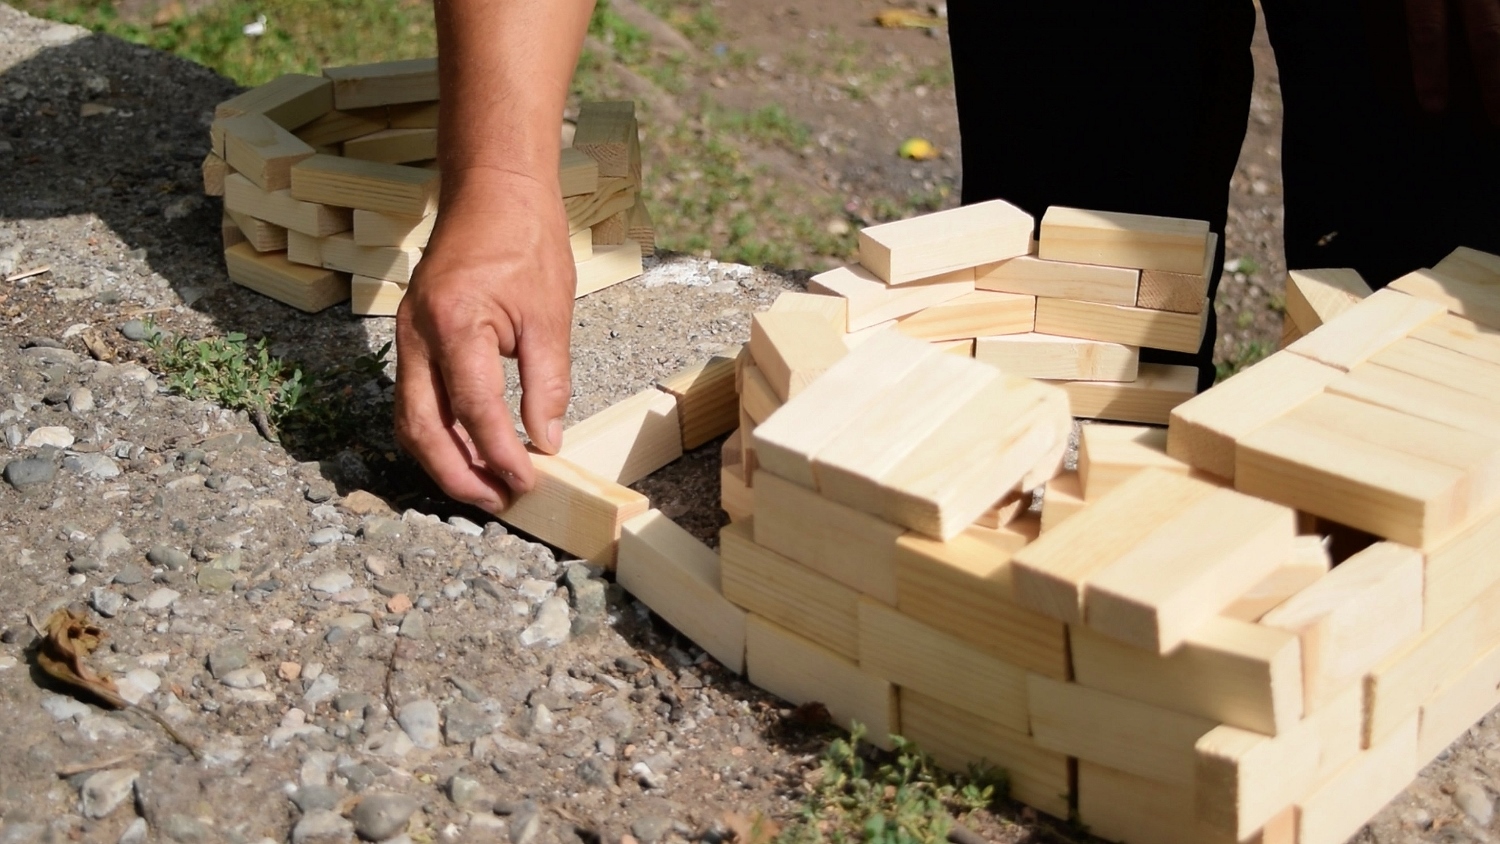 Kyrgyz master craftsman demonstrates the design of a stove using wooden blocks